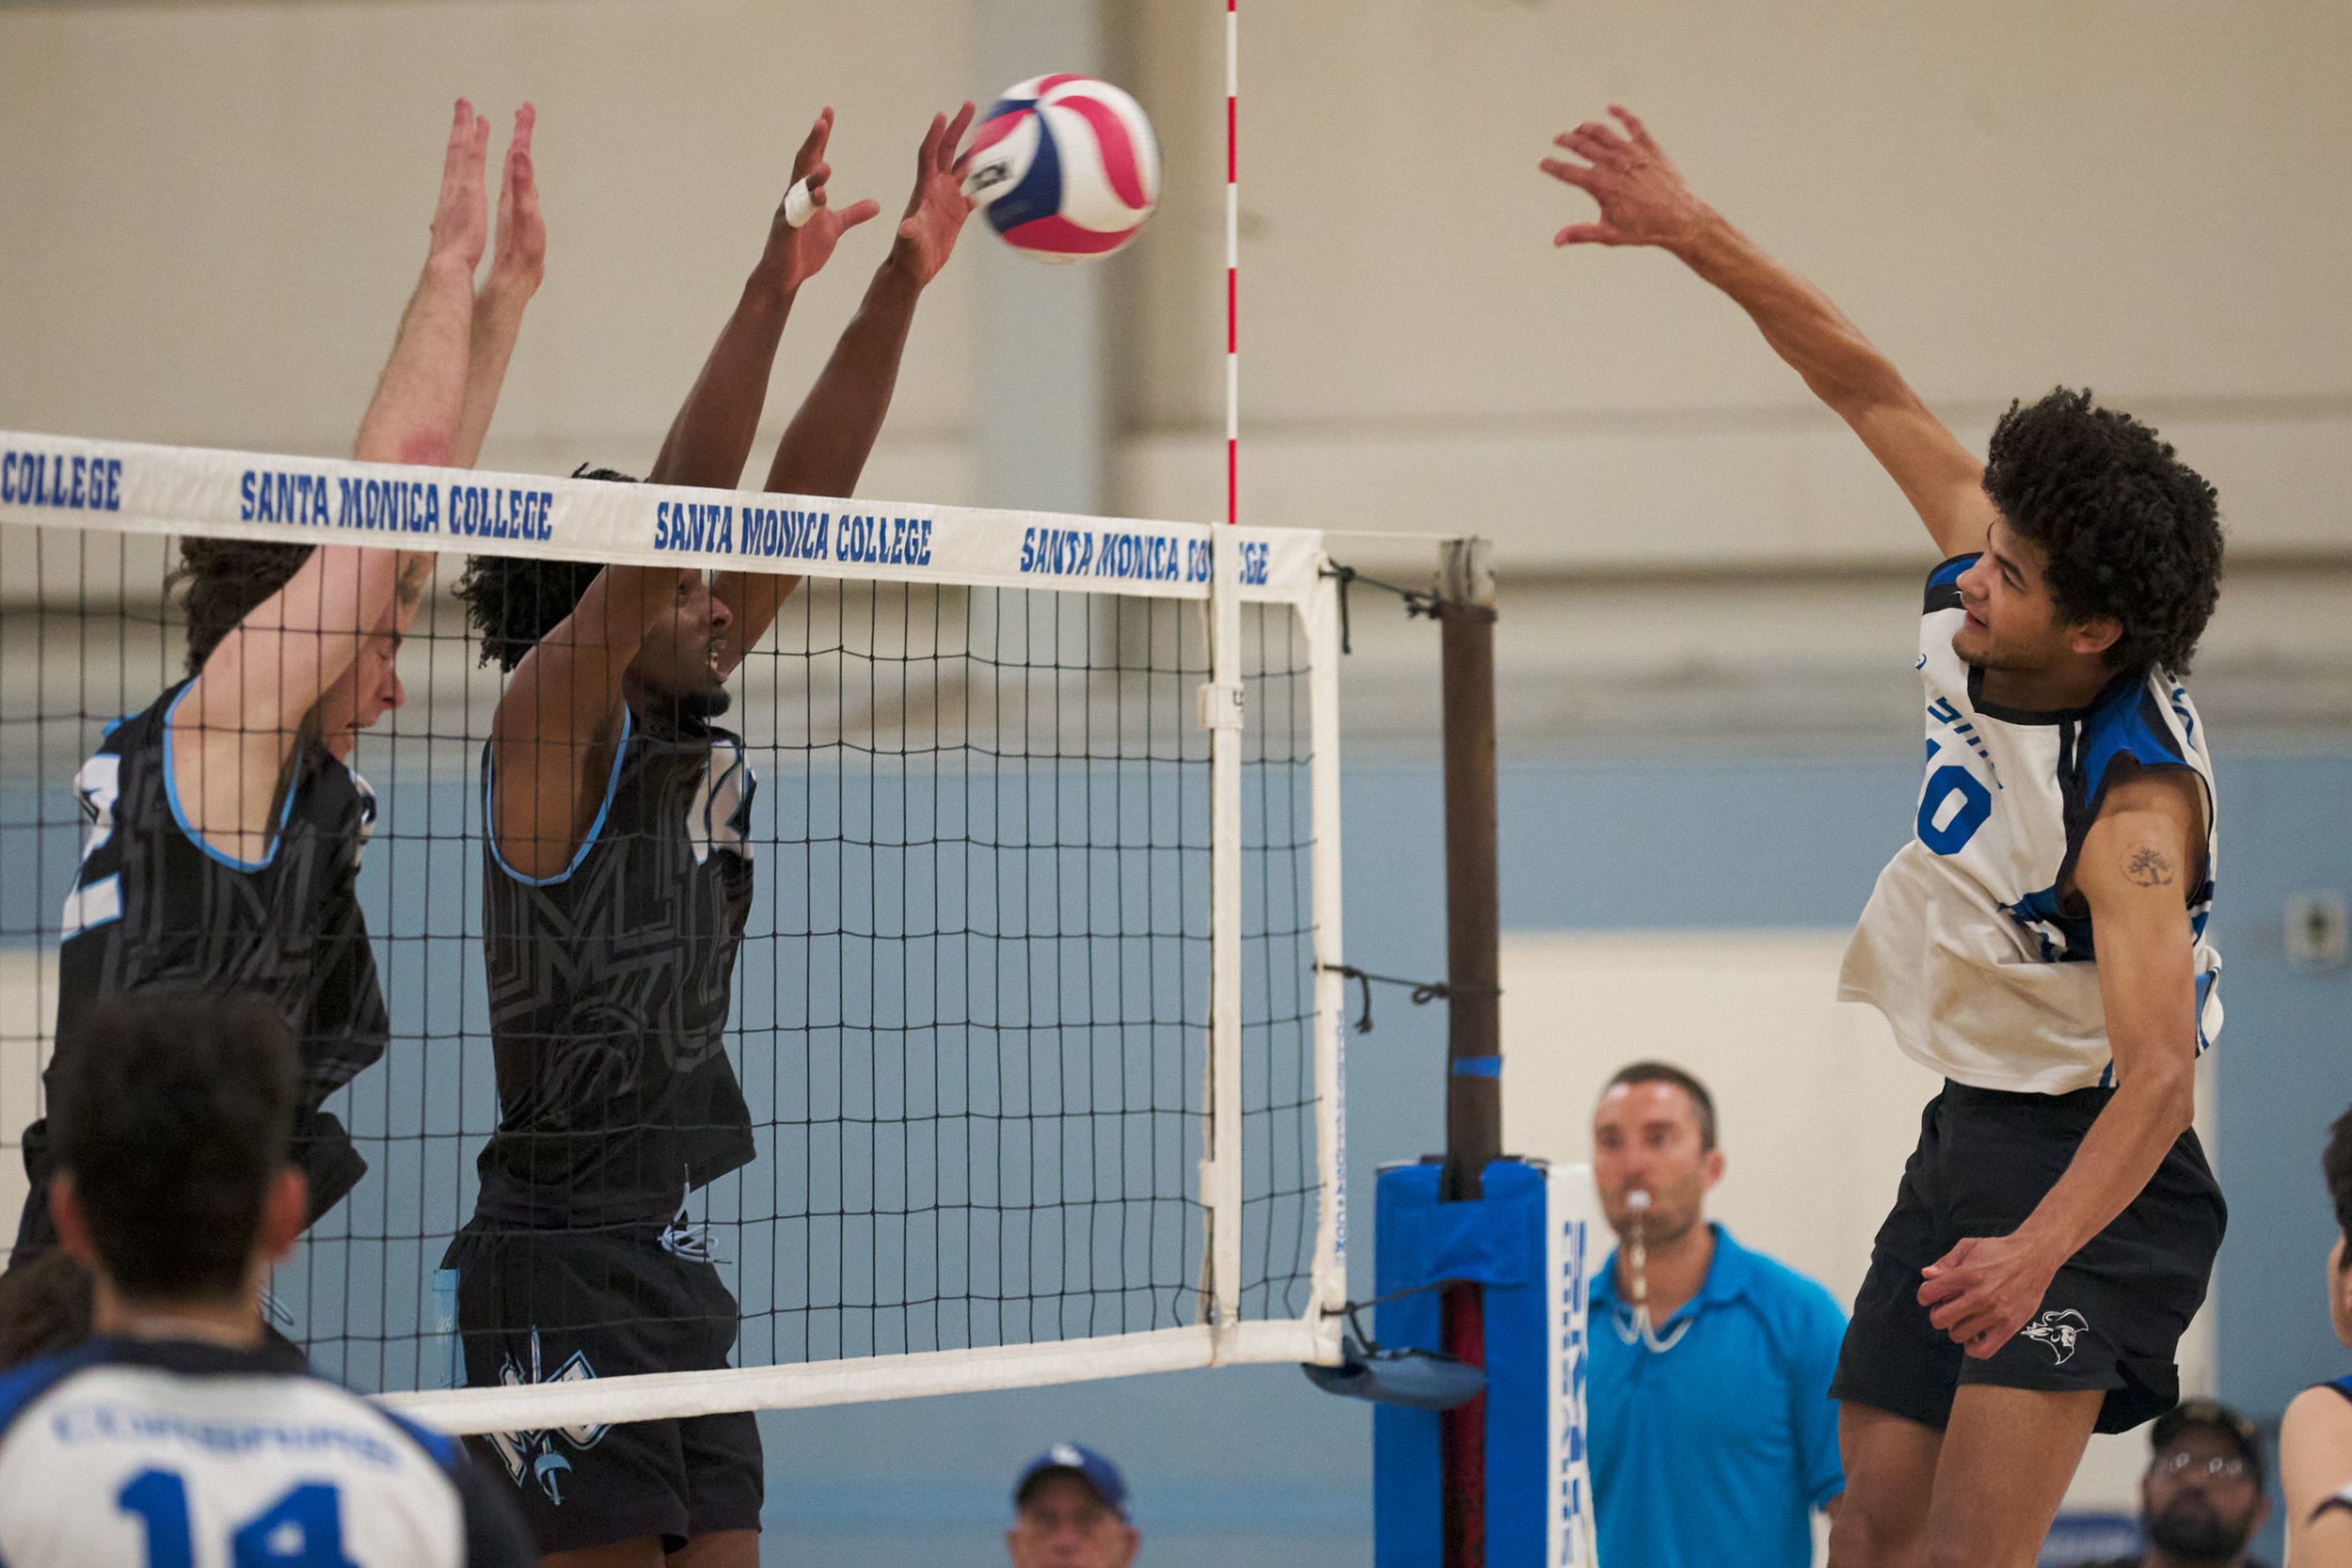  Moorpark College Raiders' Jaxon Rust and Ebba Tefera block an attack from Santa Monica College Corsairs' Nate Davis during the men's volleyball match on Wednesday, April 12, 2023, at Corsair Gym in Santa Monica, Calif. The Corsairs lost 3-0. (Nichol